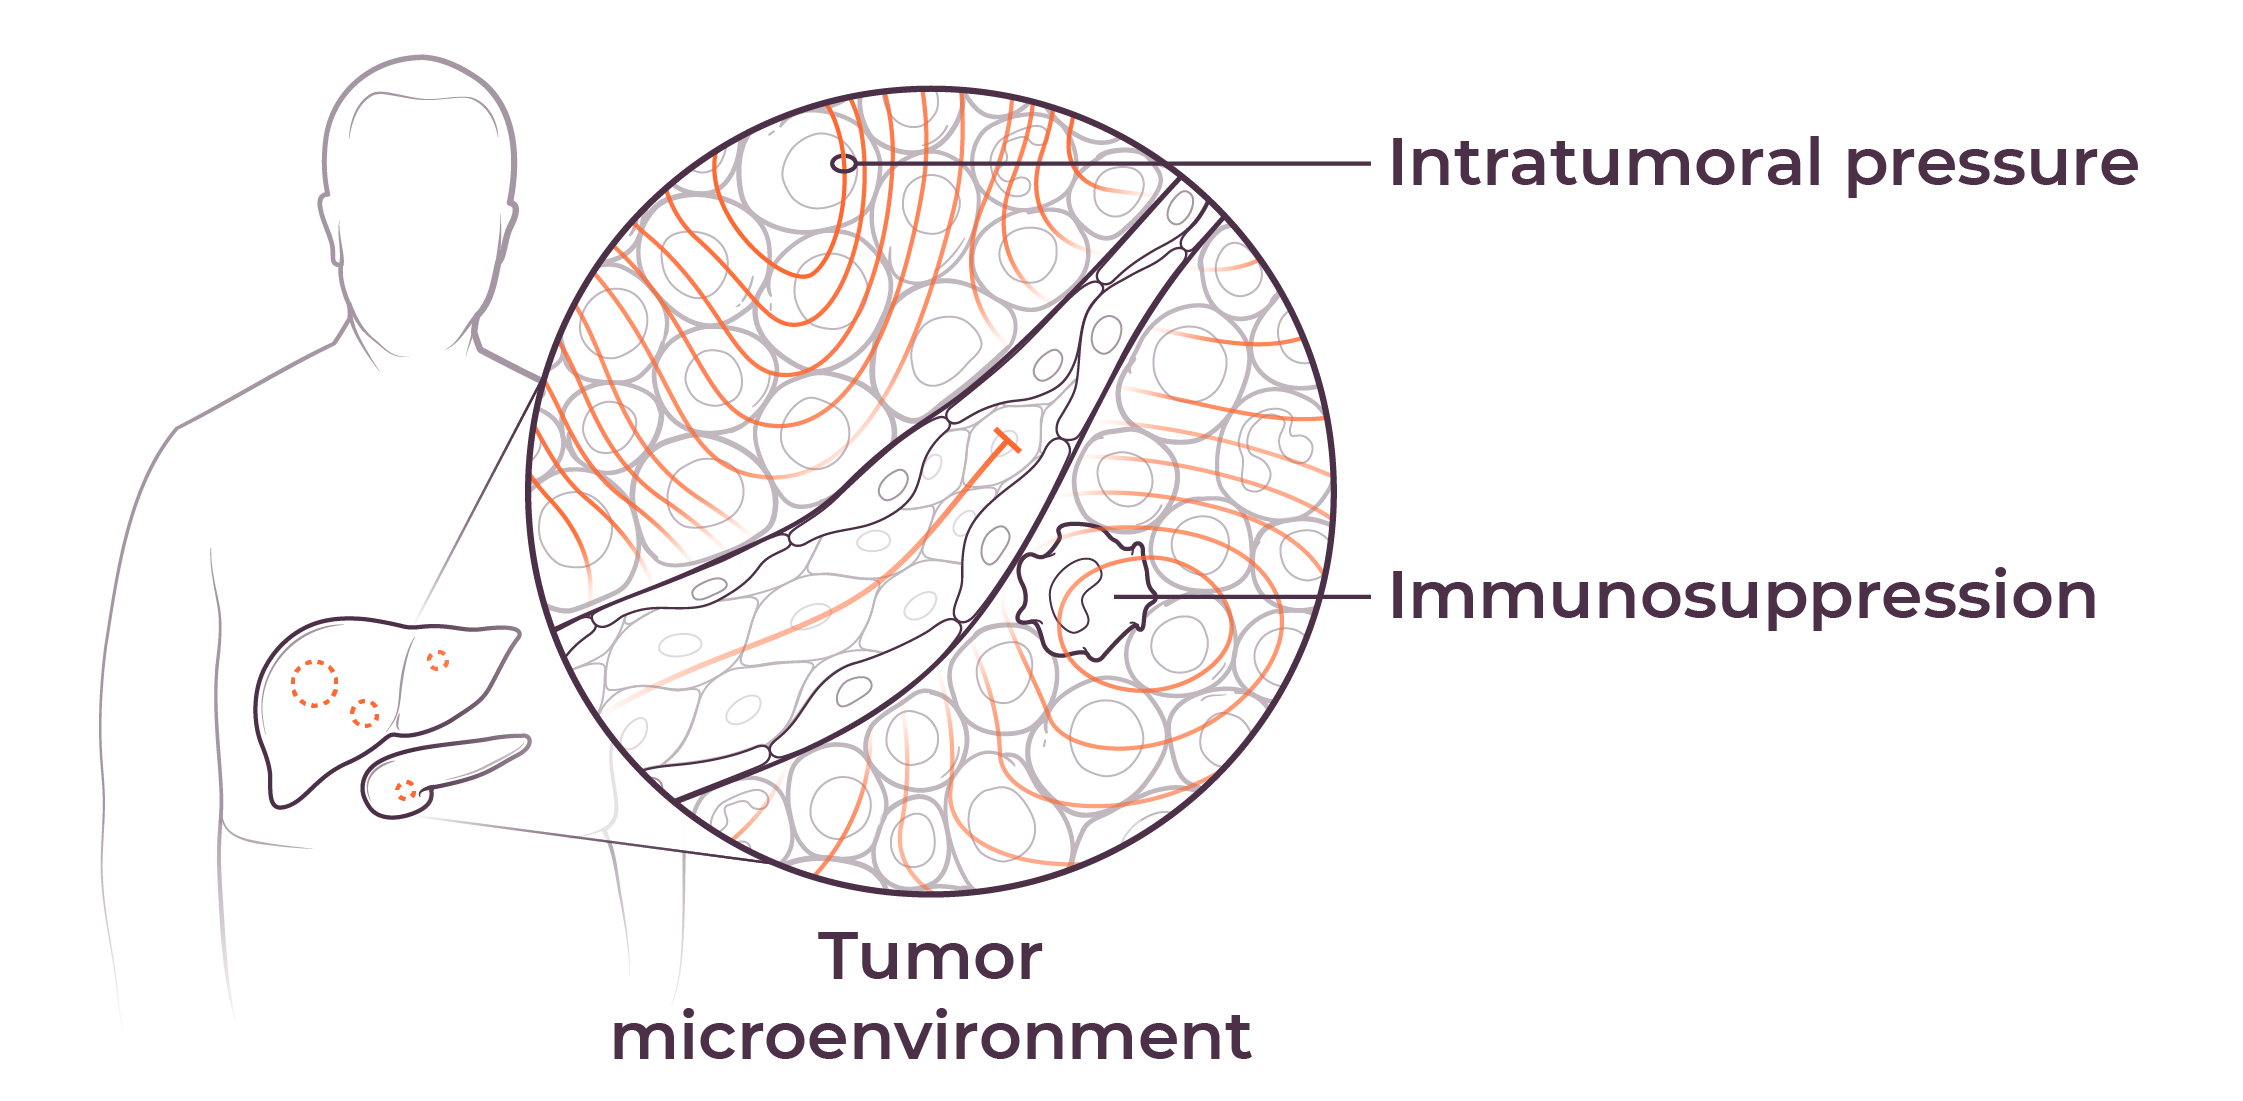 Illustration of the location of the liver and pancreas in an elderly man, with a callout bubble to show the tumor microenvironment, including immunosuppression and intratumoral pressure.